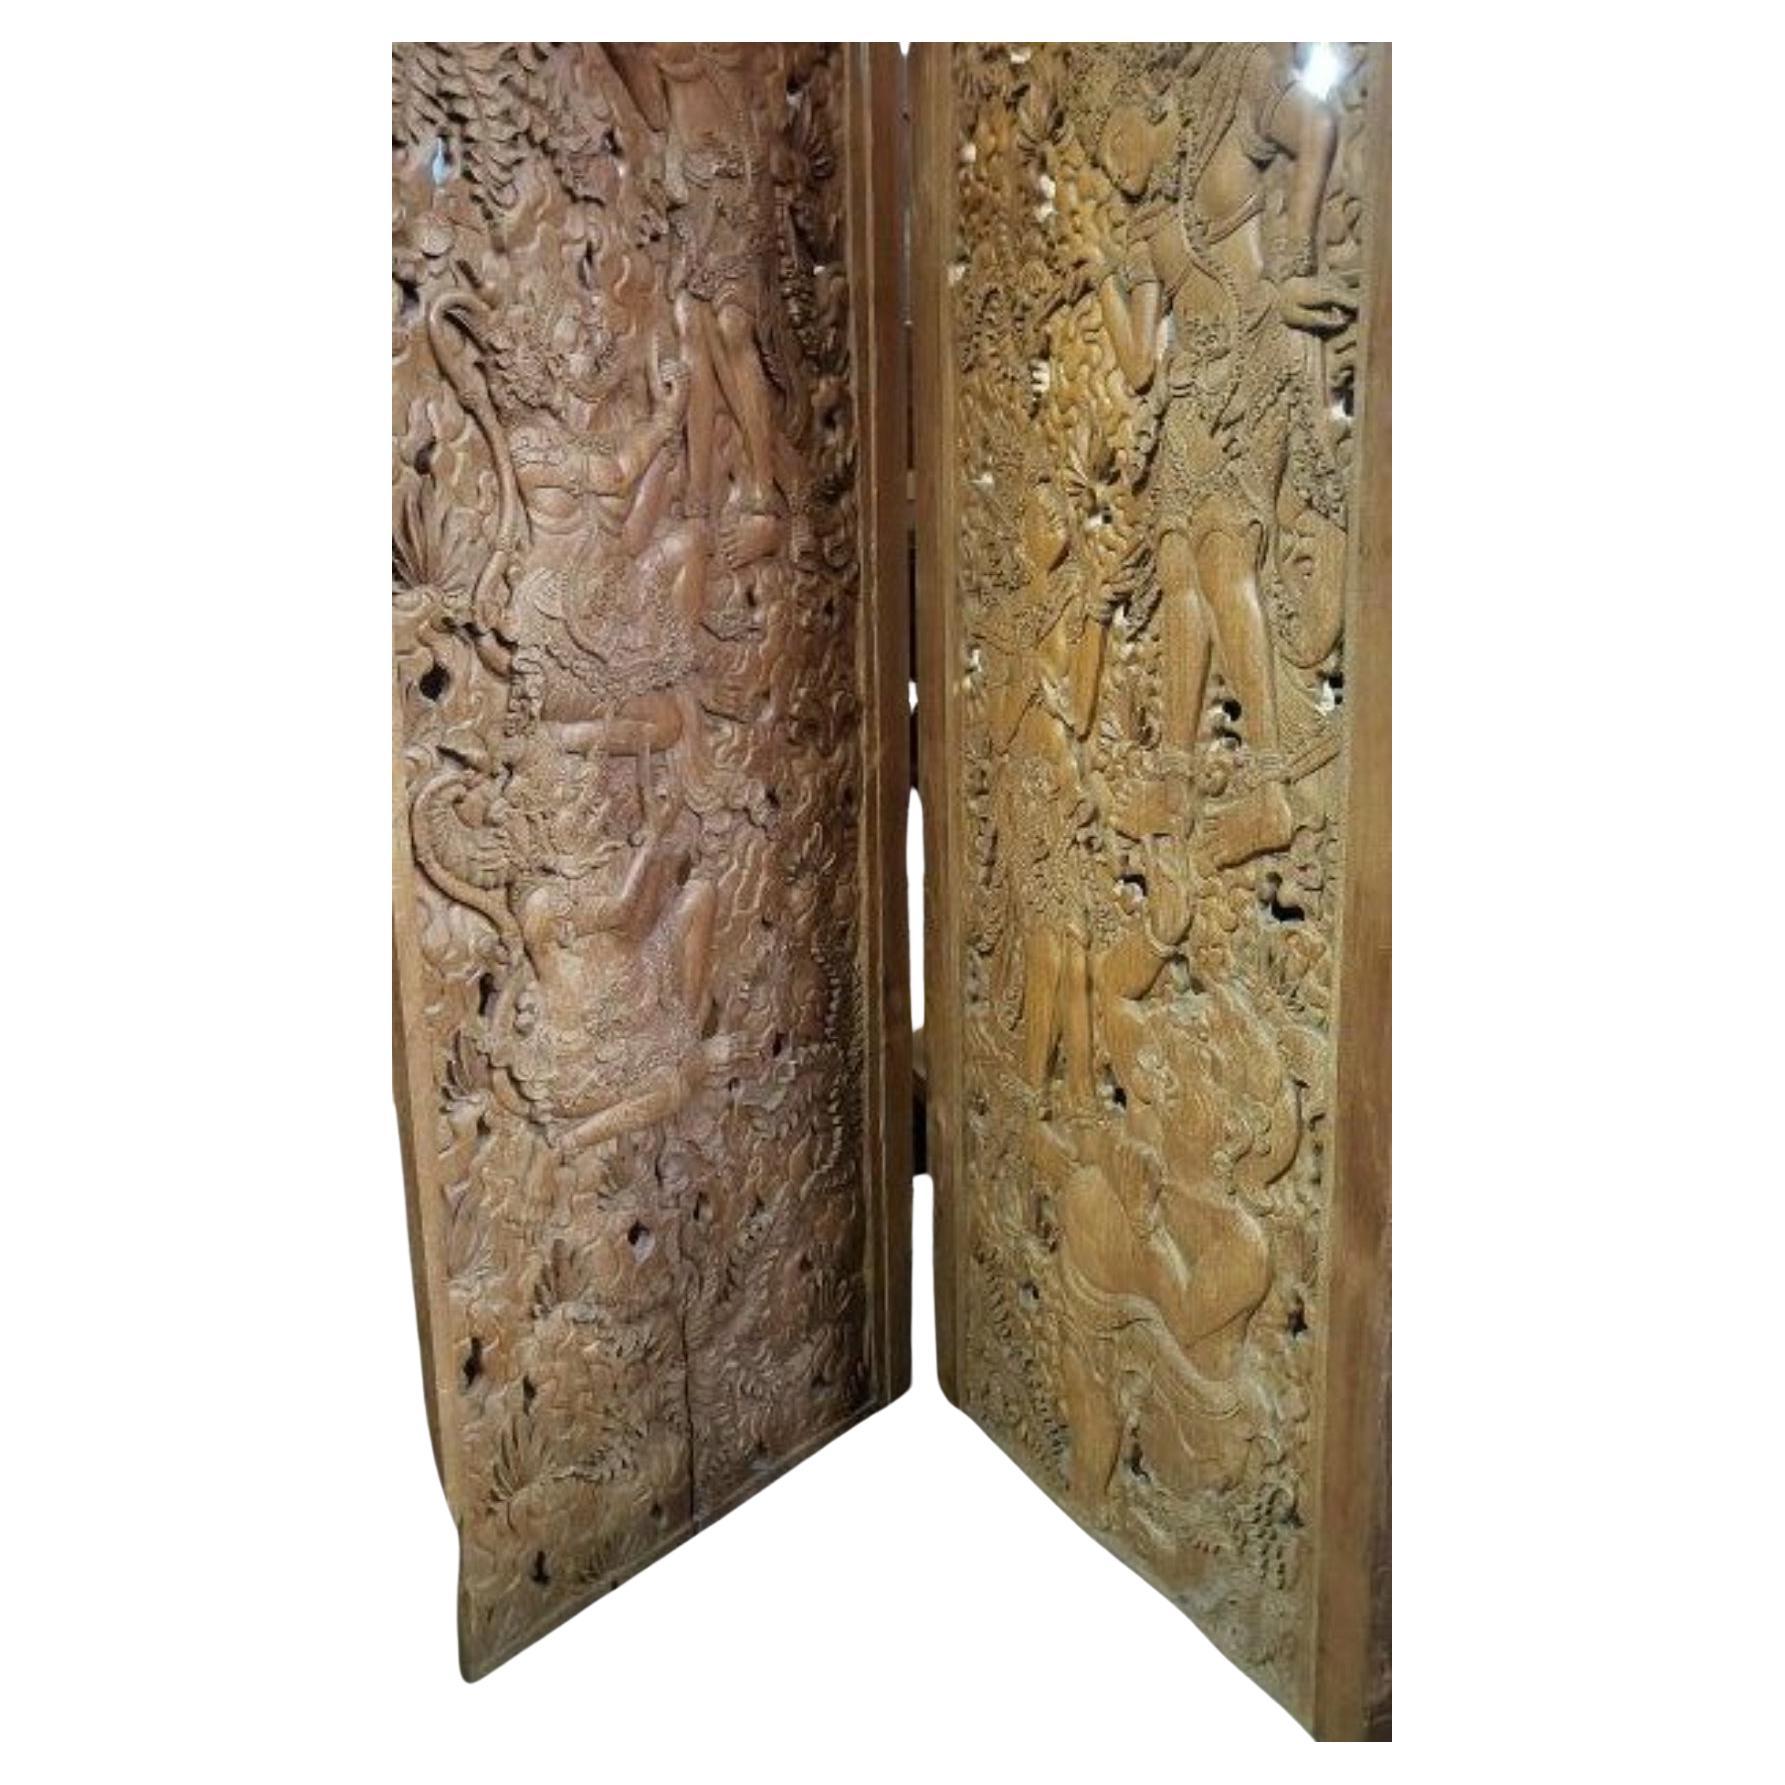 Beautiful Tall Thai Dividers with Heavy Wood Carving